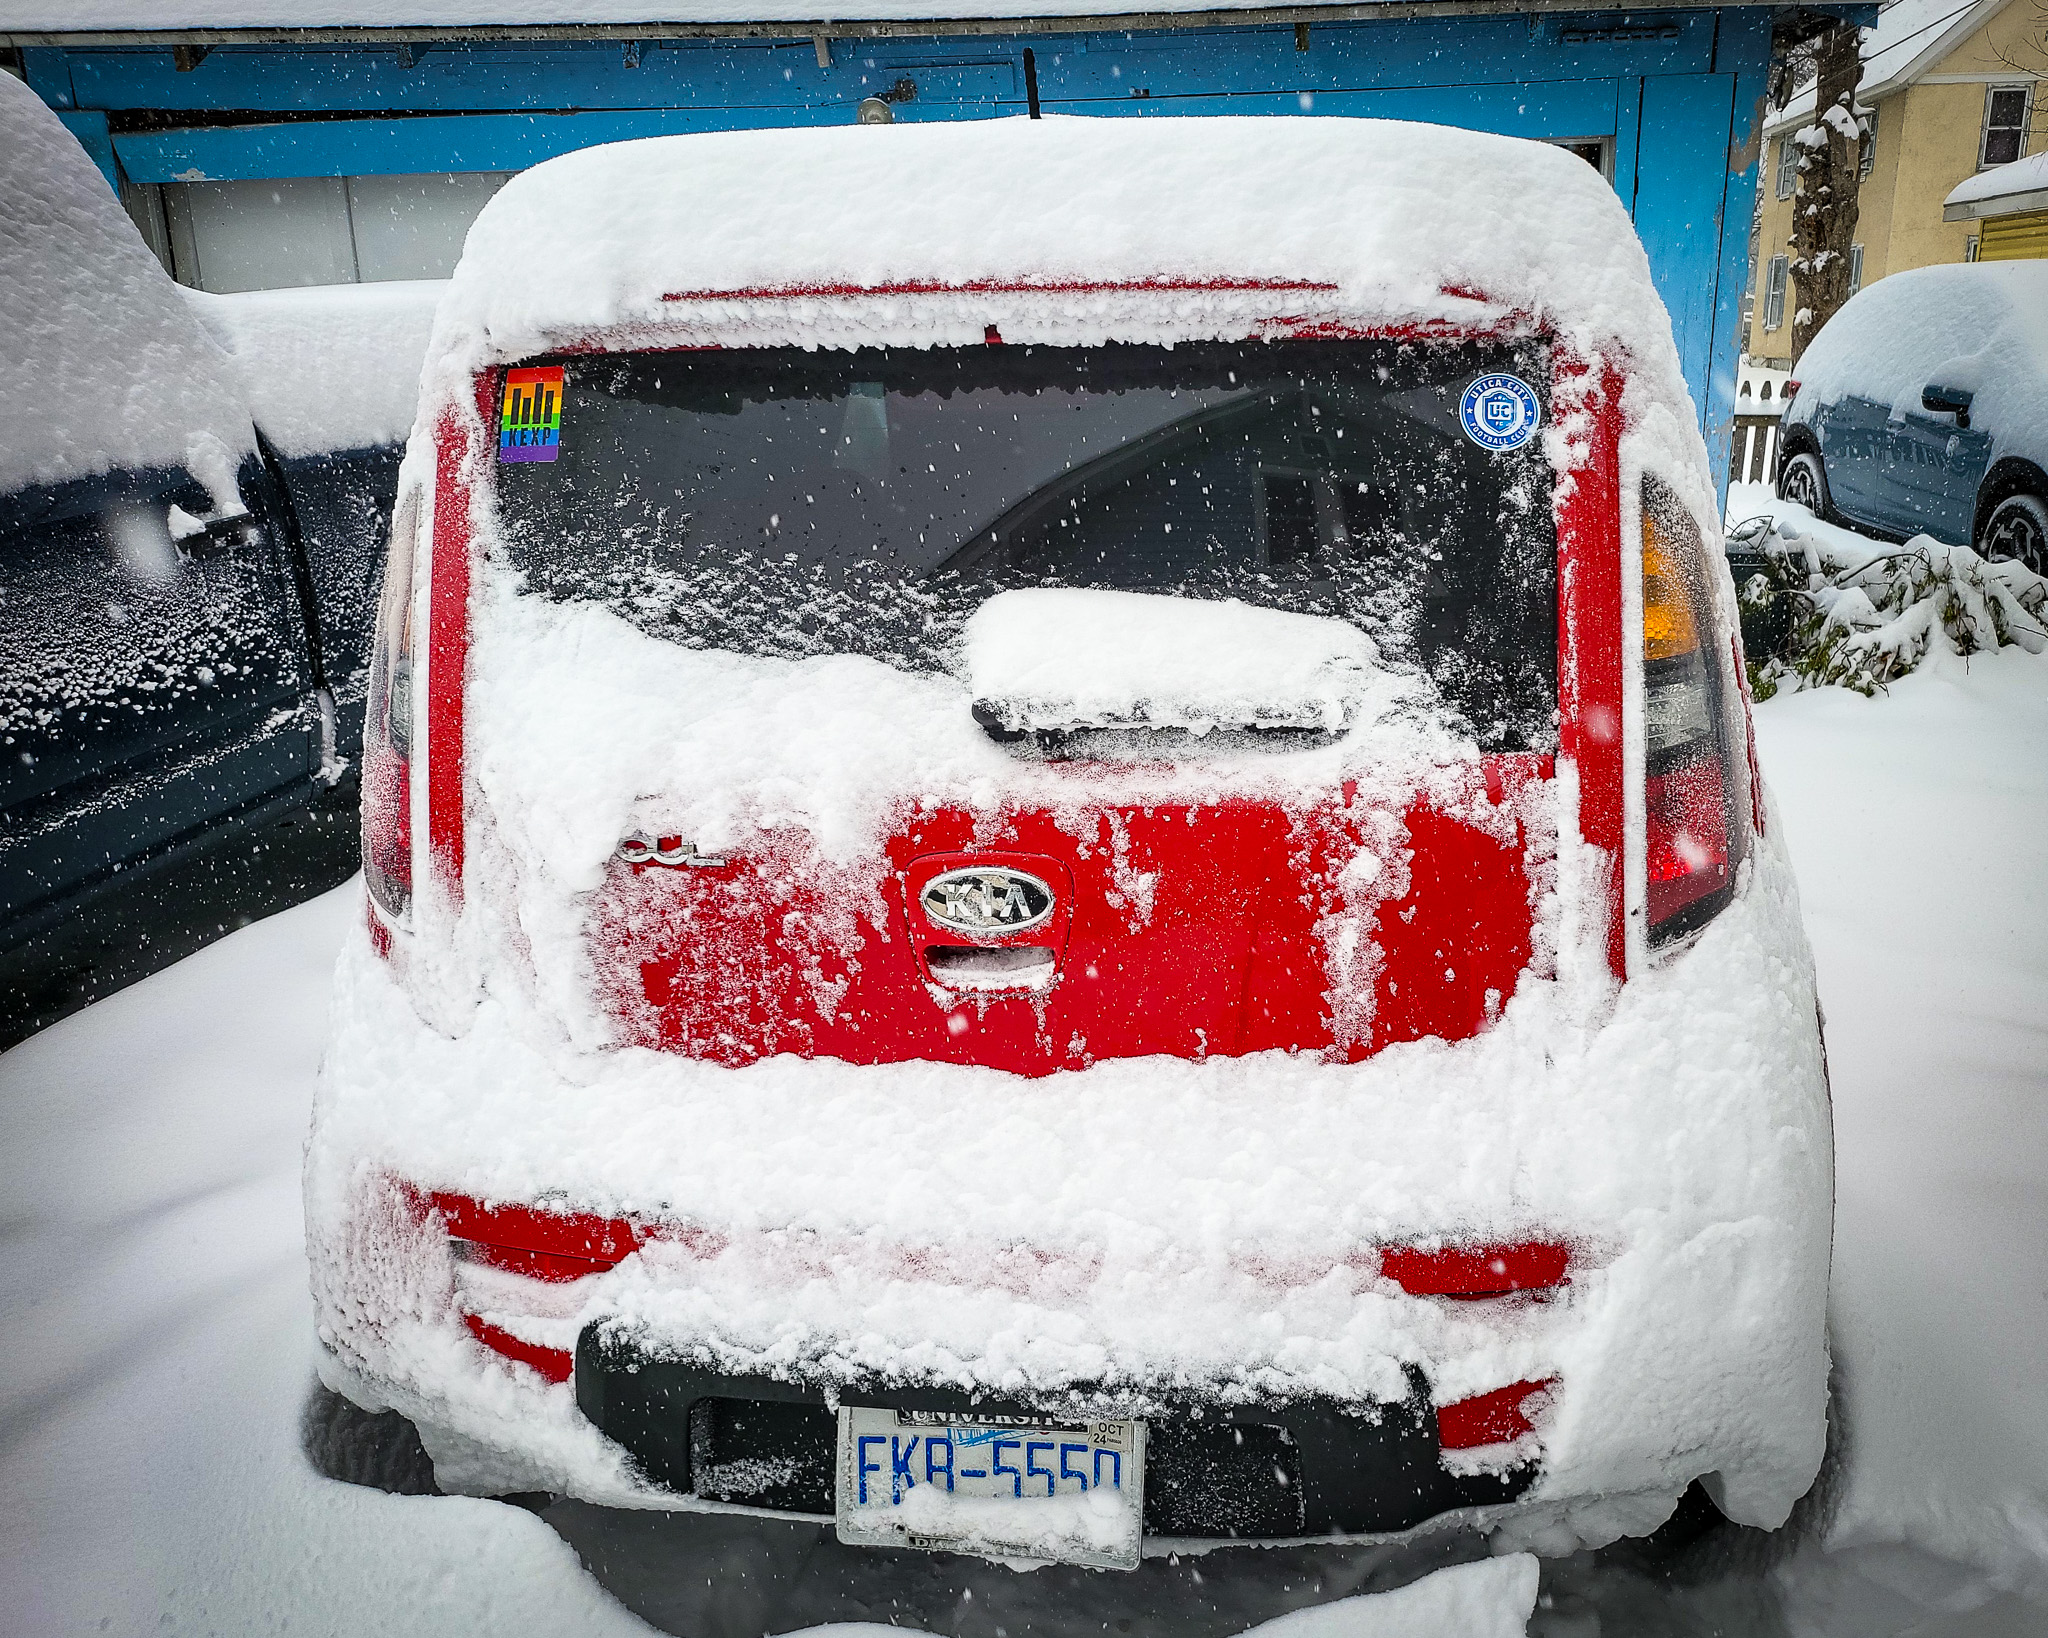 snow covered Roz (kia soul) with two stickers visible on the back hatch glass